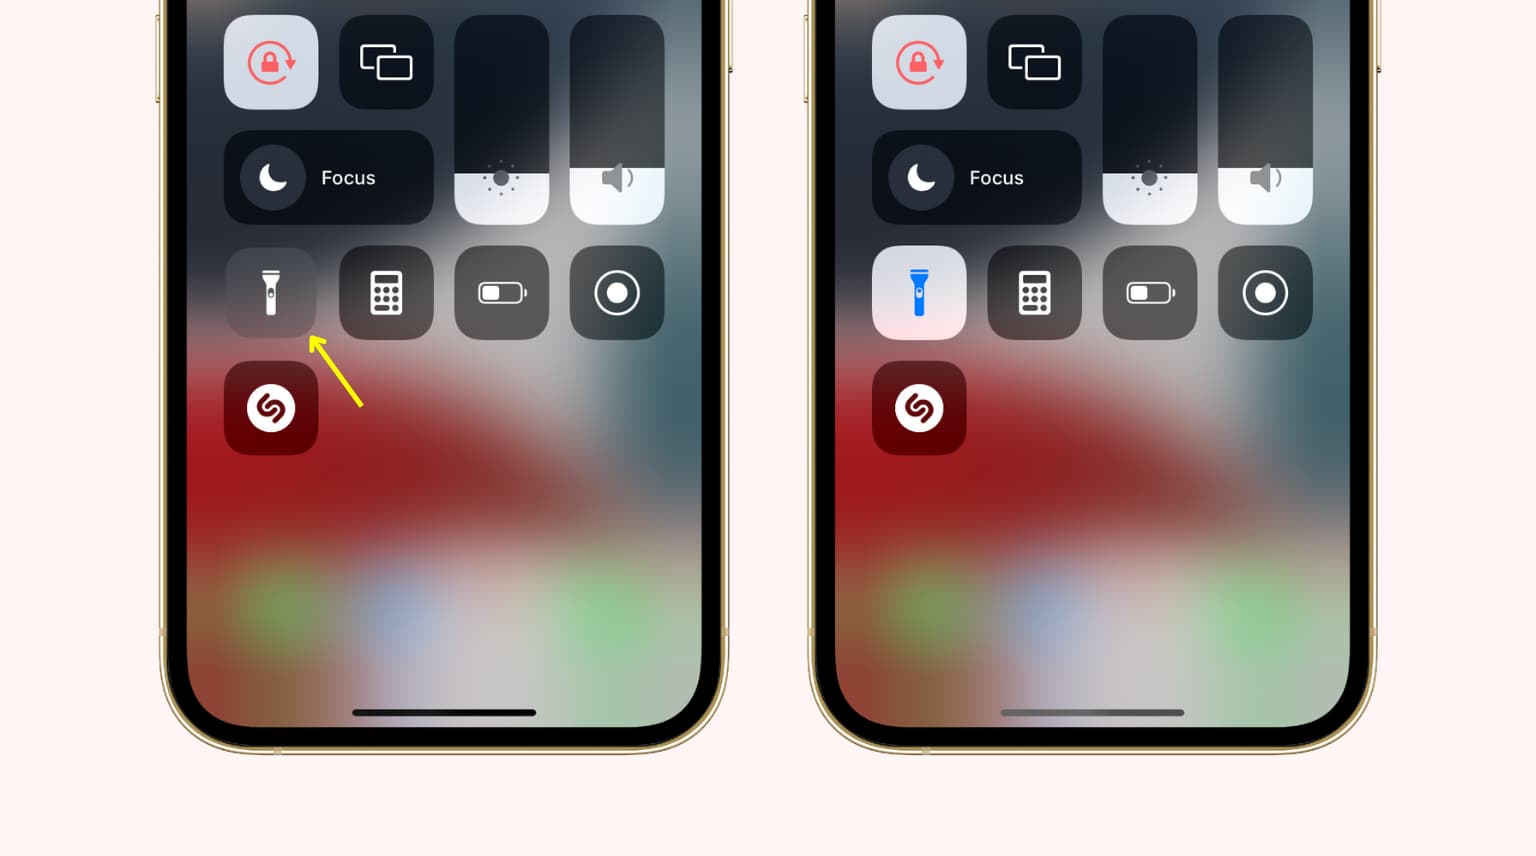 flashlight-missing-from-control-center-on-iphone-how-to-get-it-back